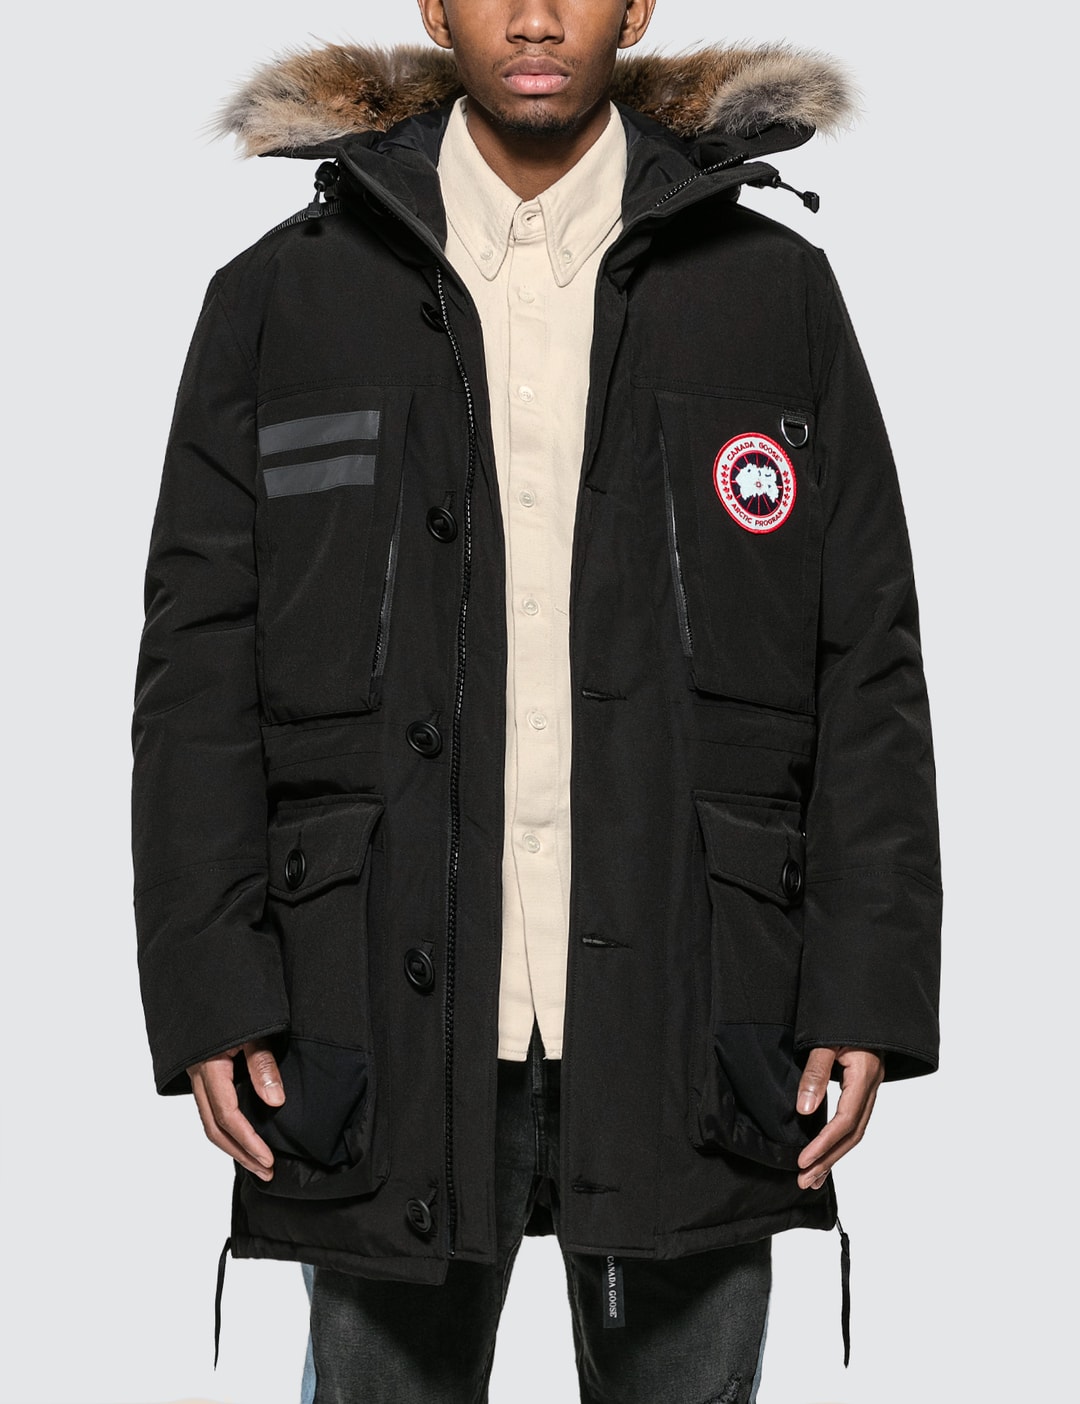 Canada Goose - Macculloch Down Parka | HBX - Globally Curated Fashion ...